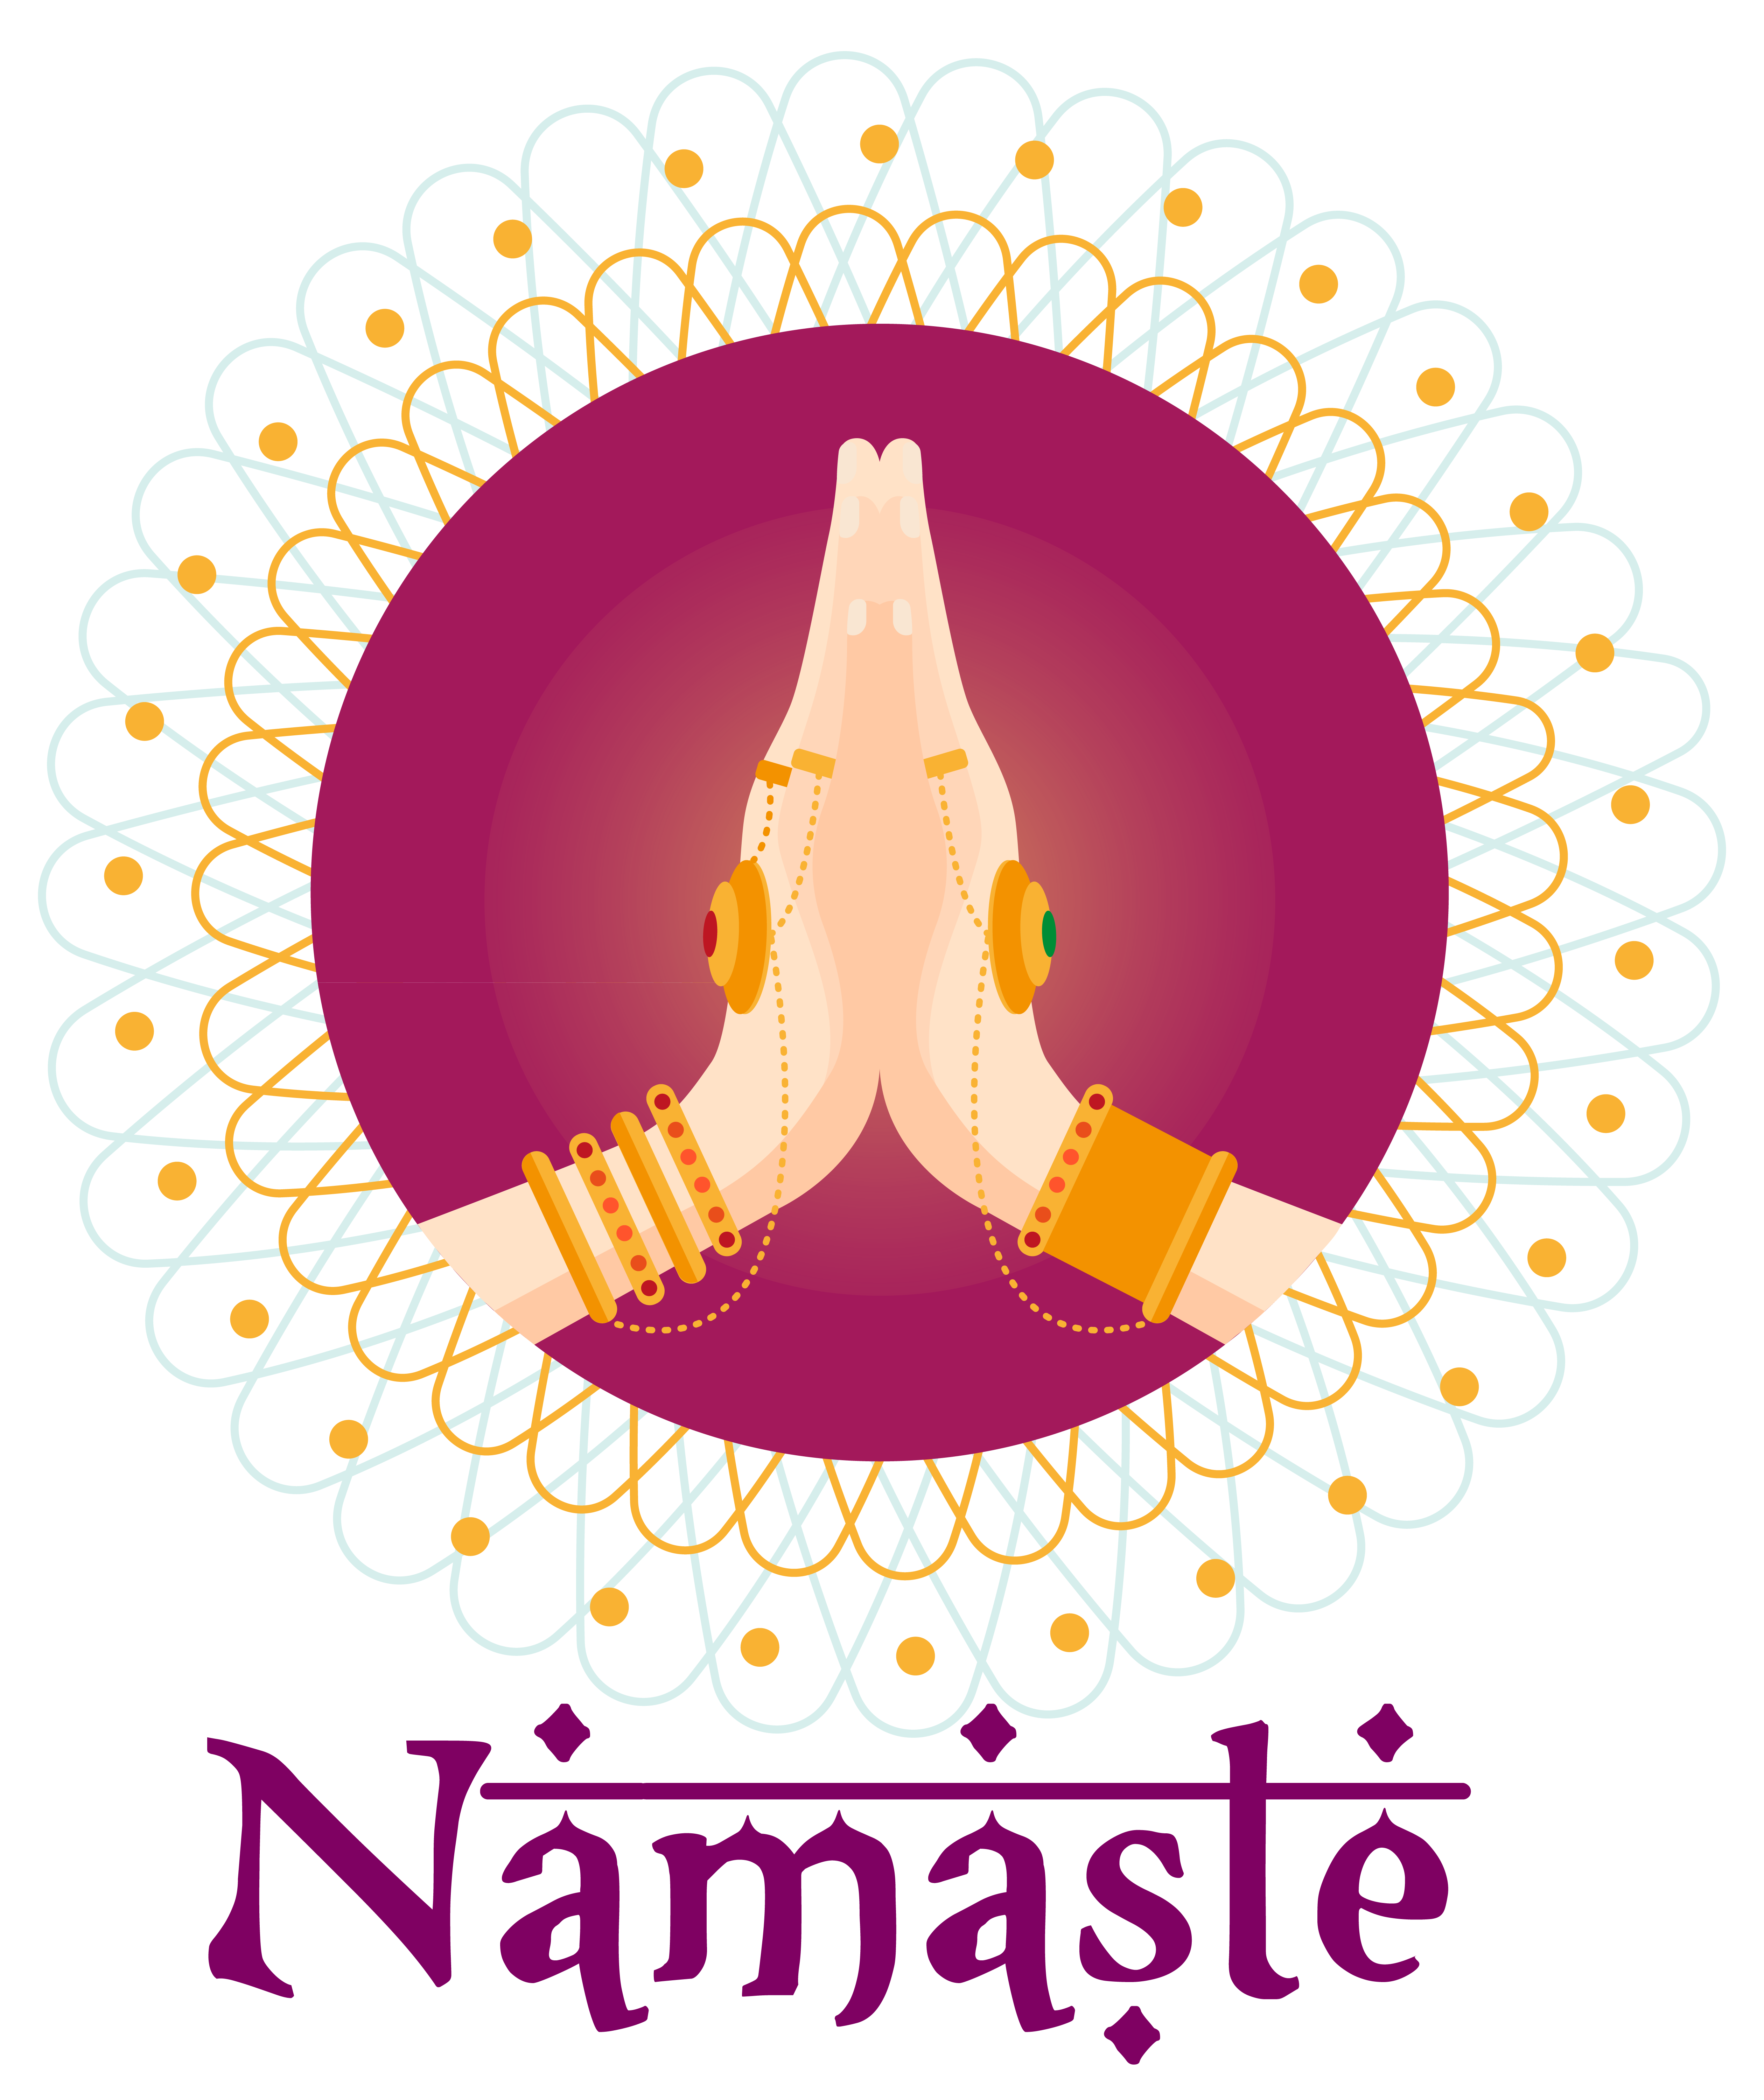 Namaste png images pinterest. Square clipart toast